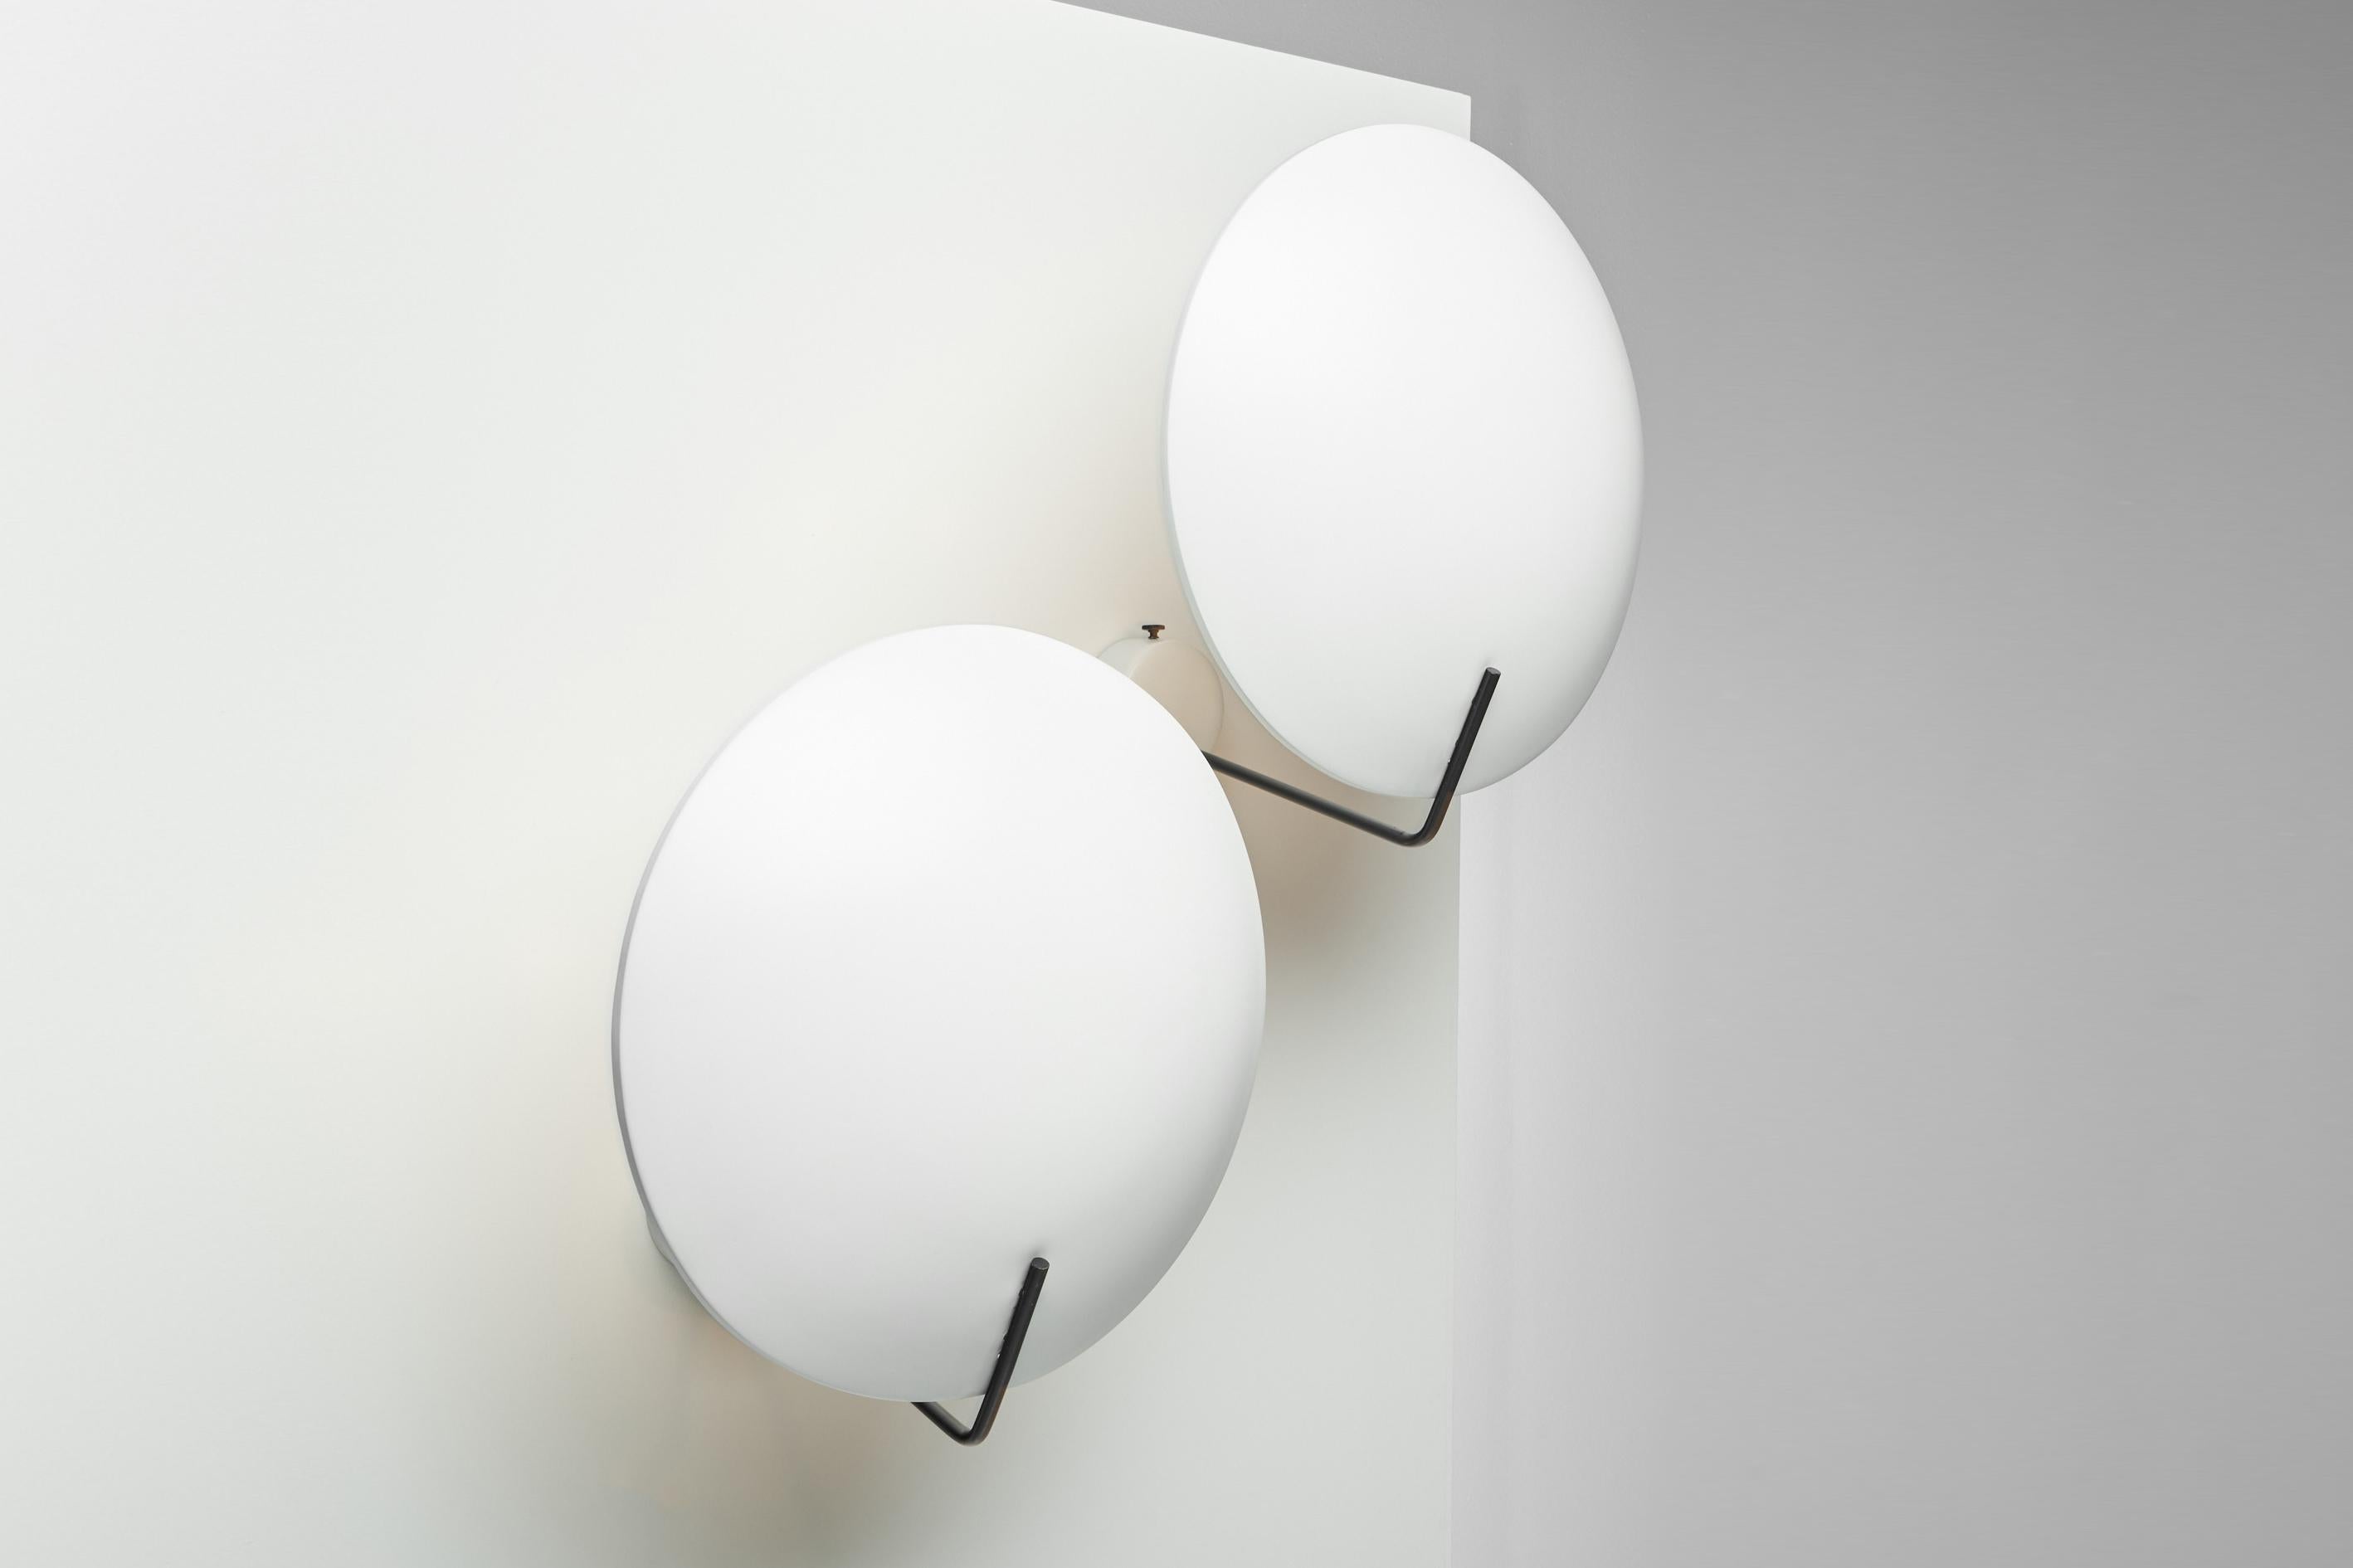 Metal Stilnovo 232 Wall Lamps by Bruno Gatta, Italy, 1954 For Sale